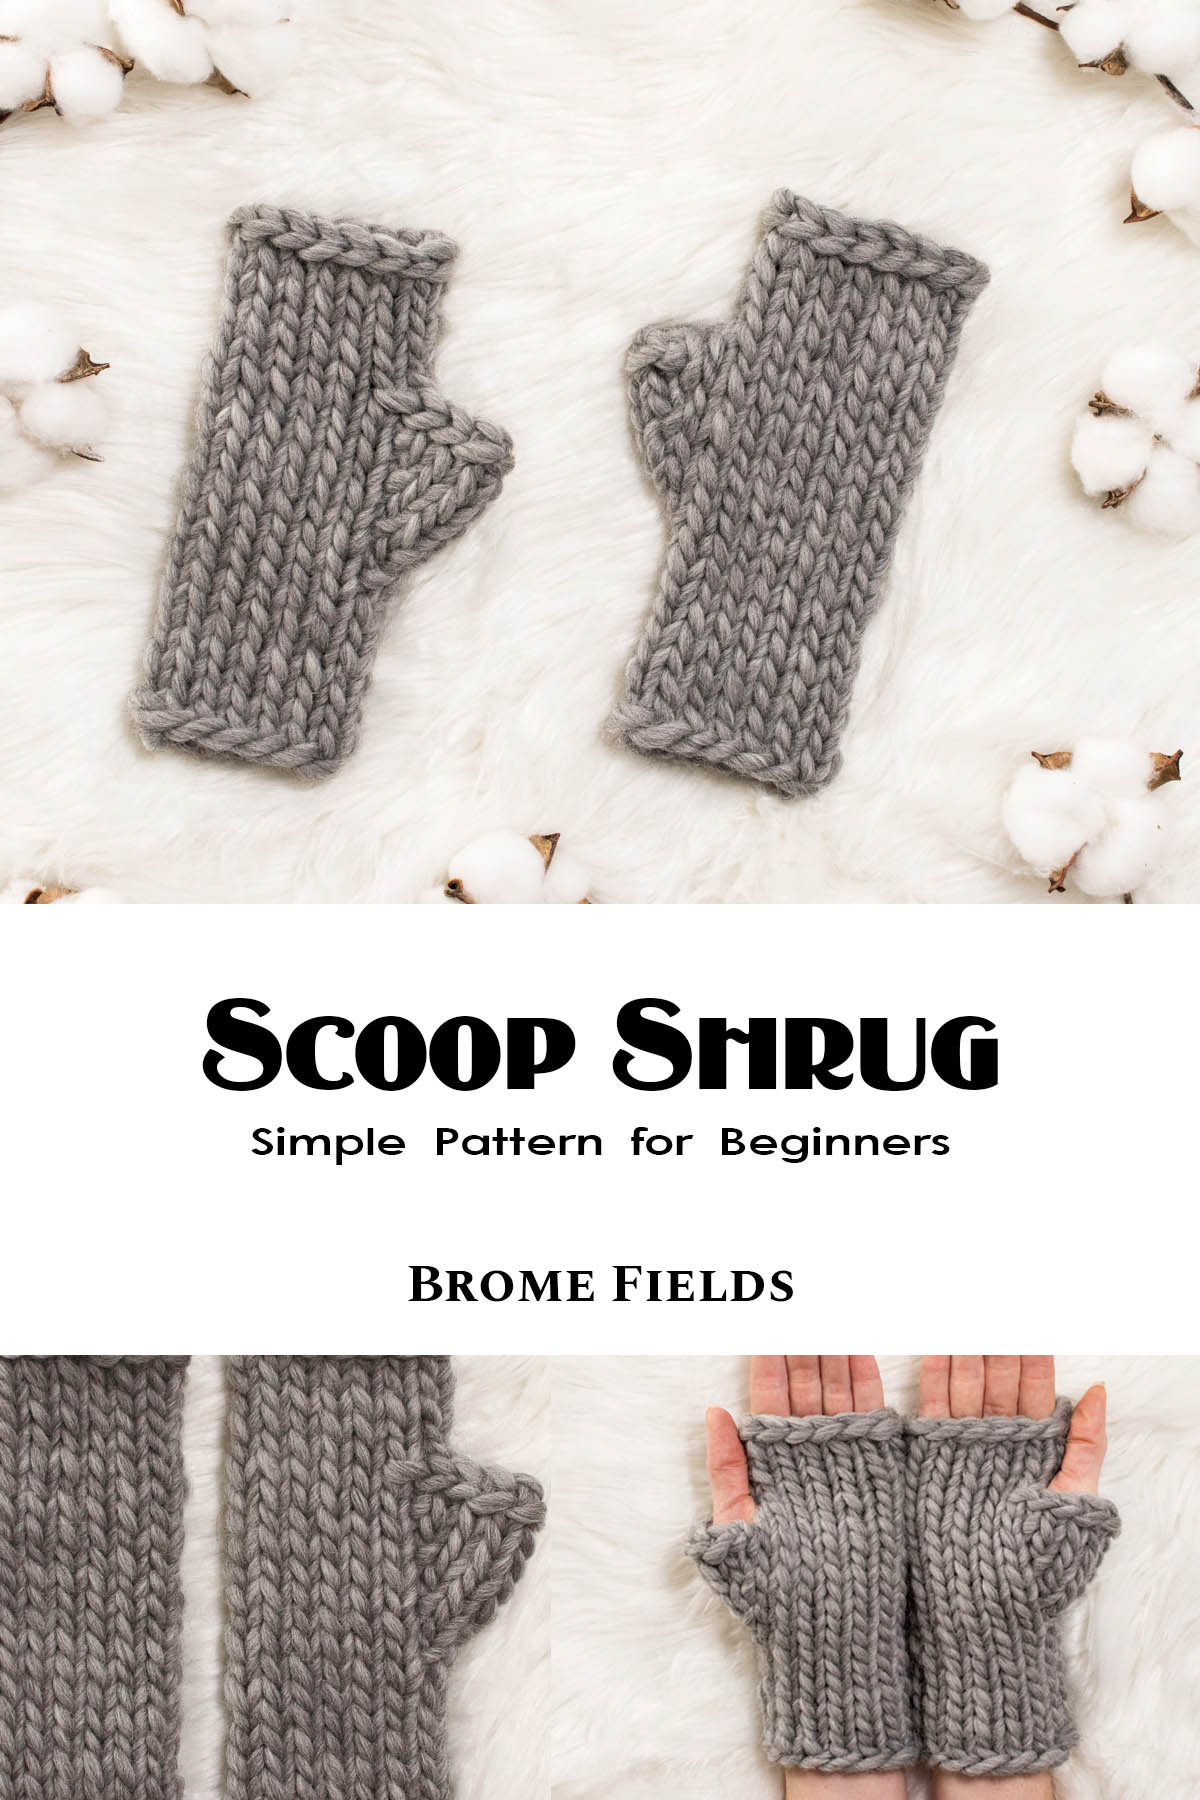 How to Knit Fingerless Gloves in the Round : Brome Fields